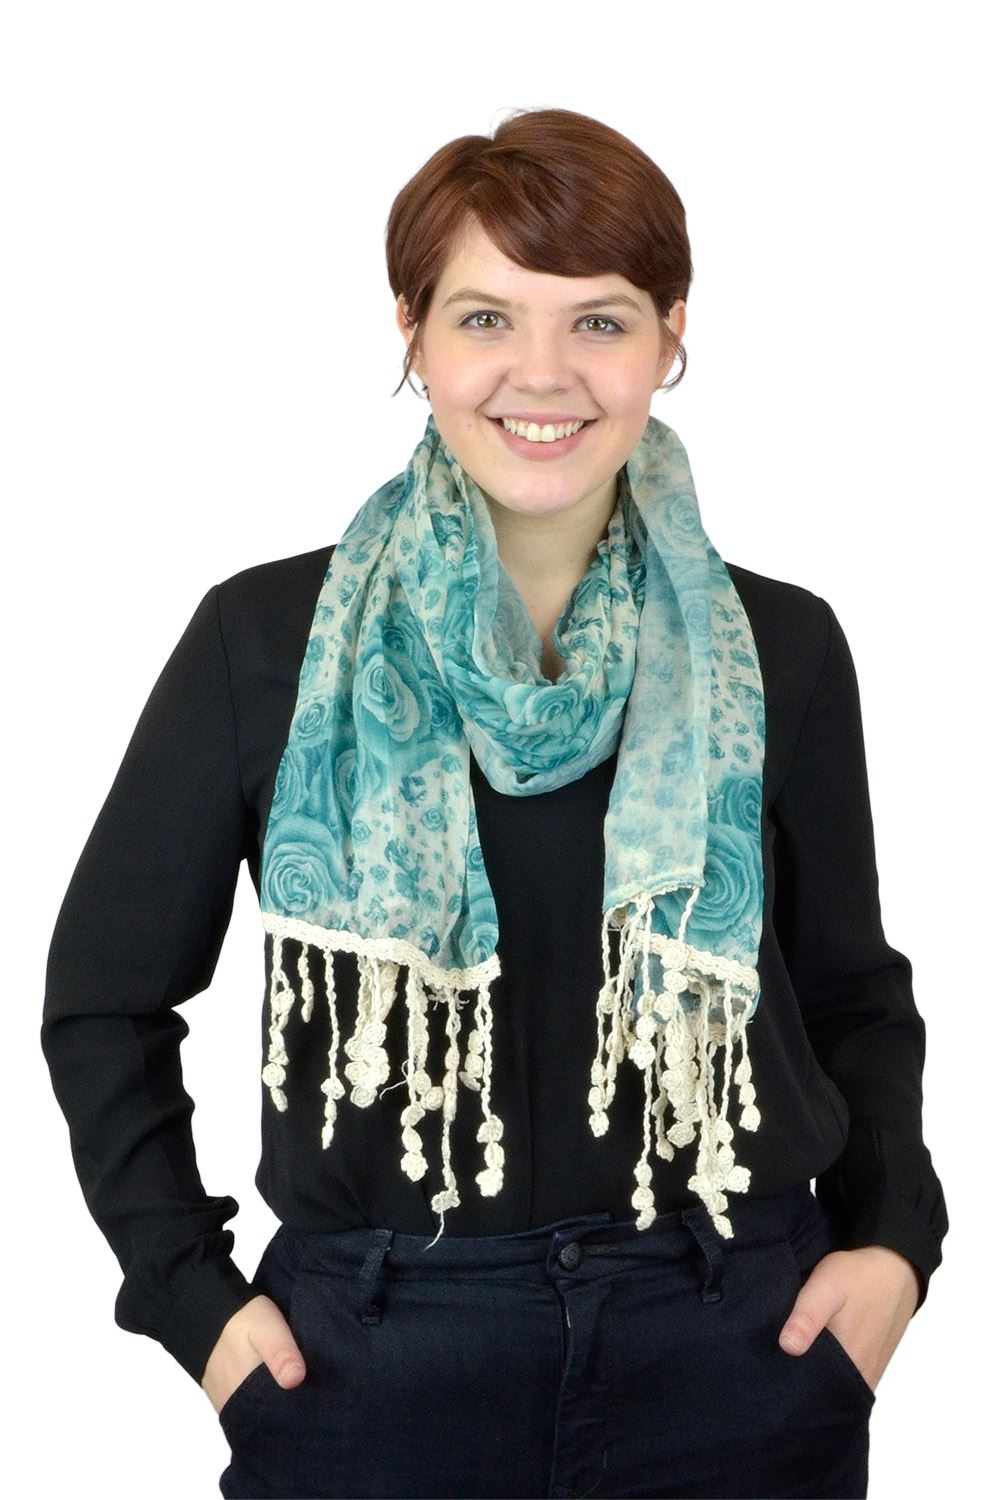 Belle Donne - Women Floral Scarf Viscose Scarves  Laced Scarf Head Scarf for Women - Turquoise Scarfs for Women